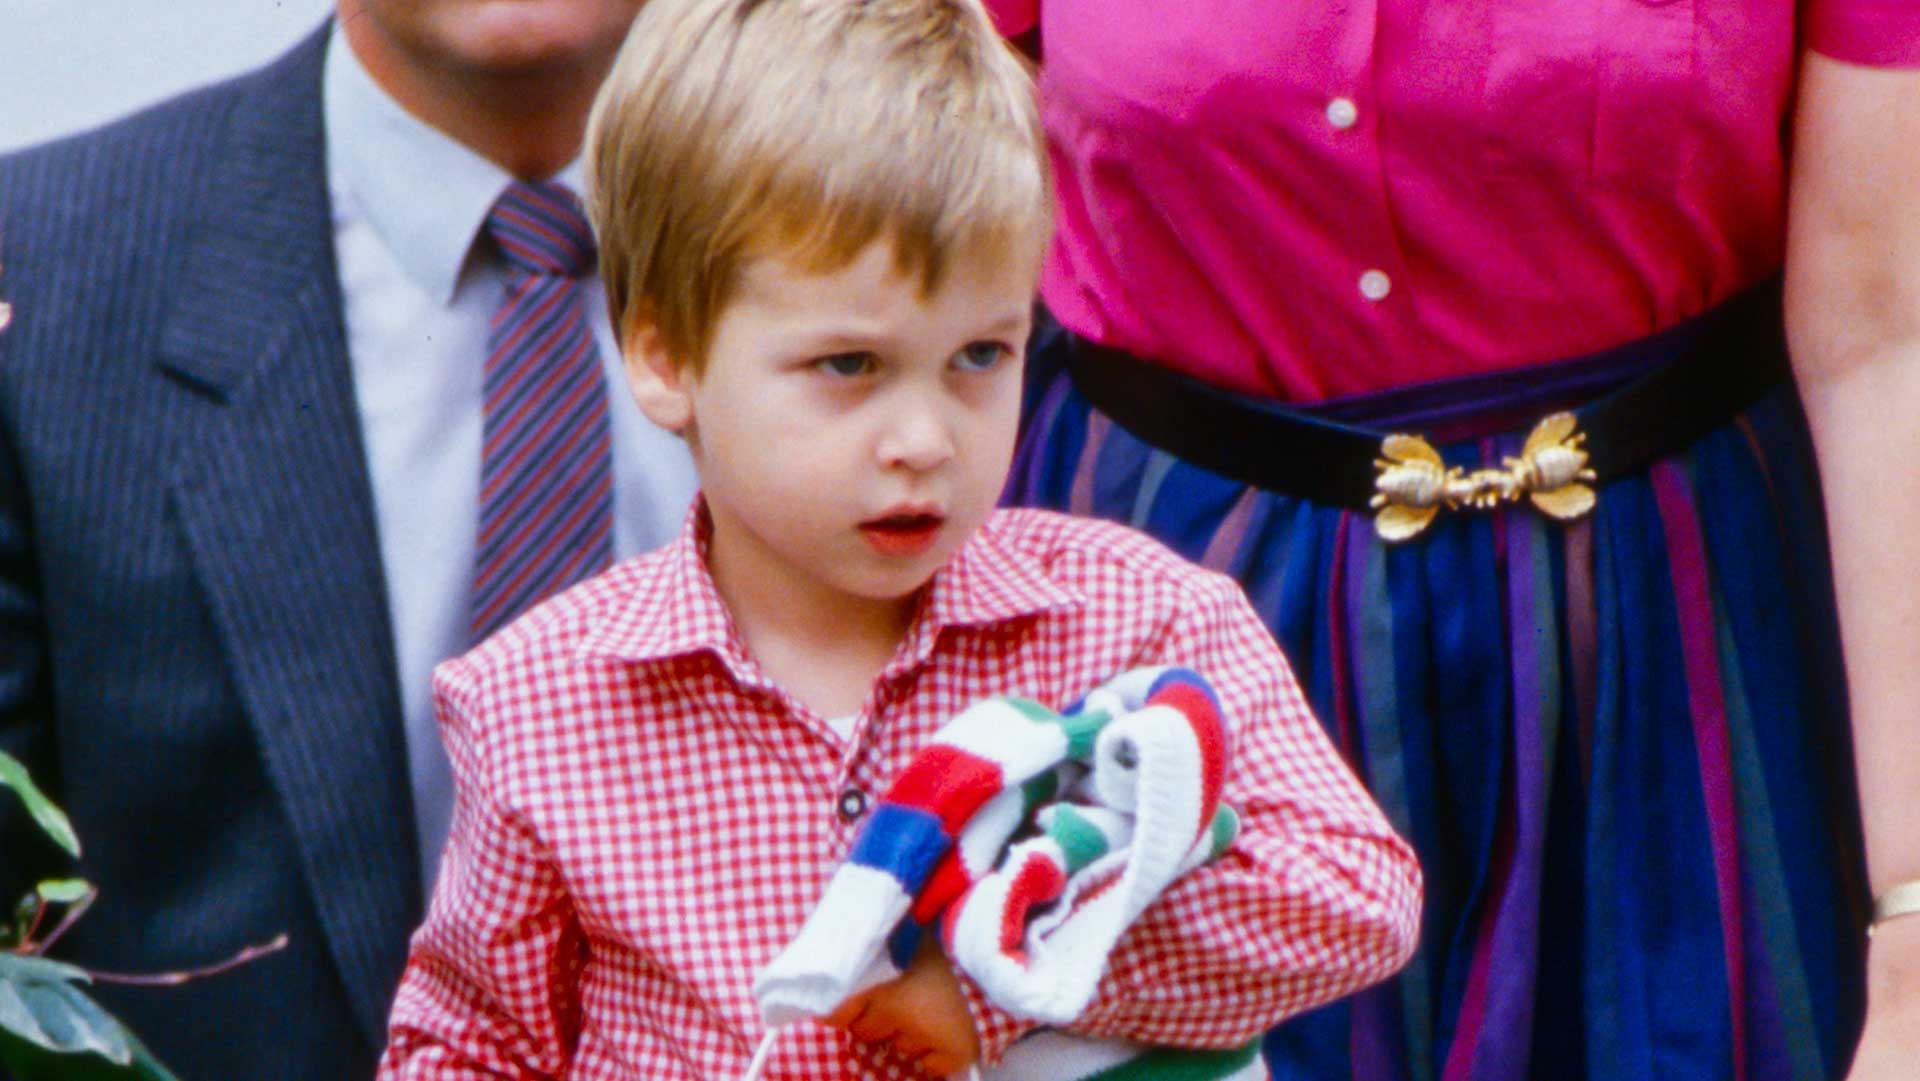 Prince William’s first day at school